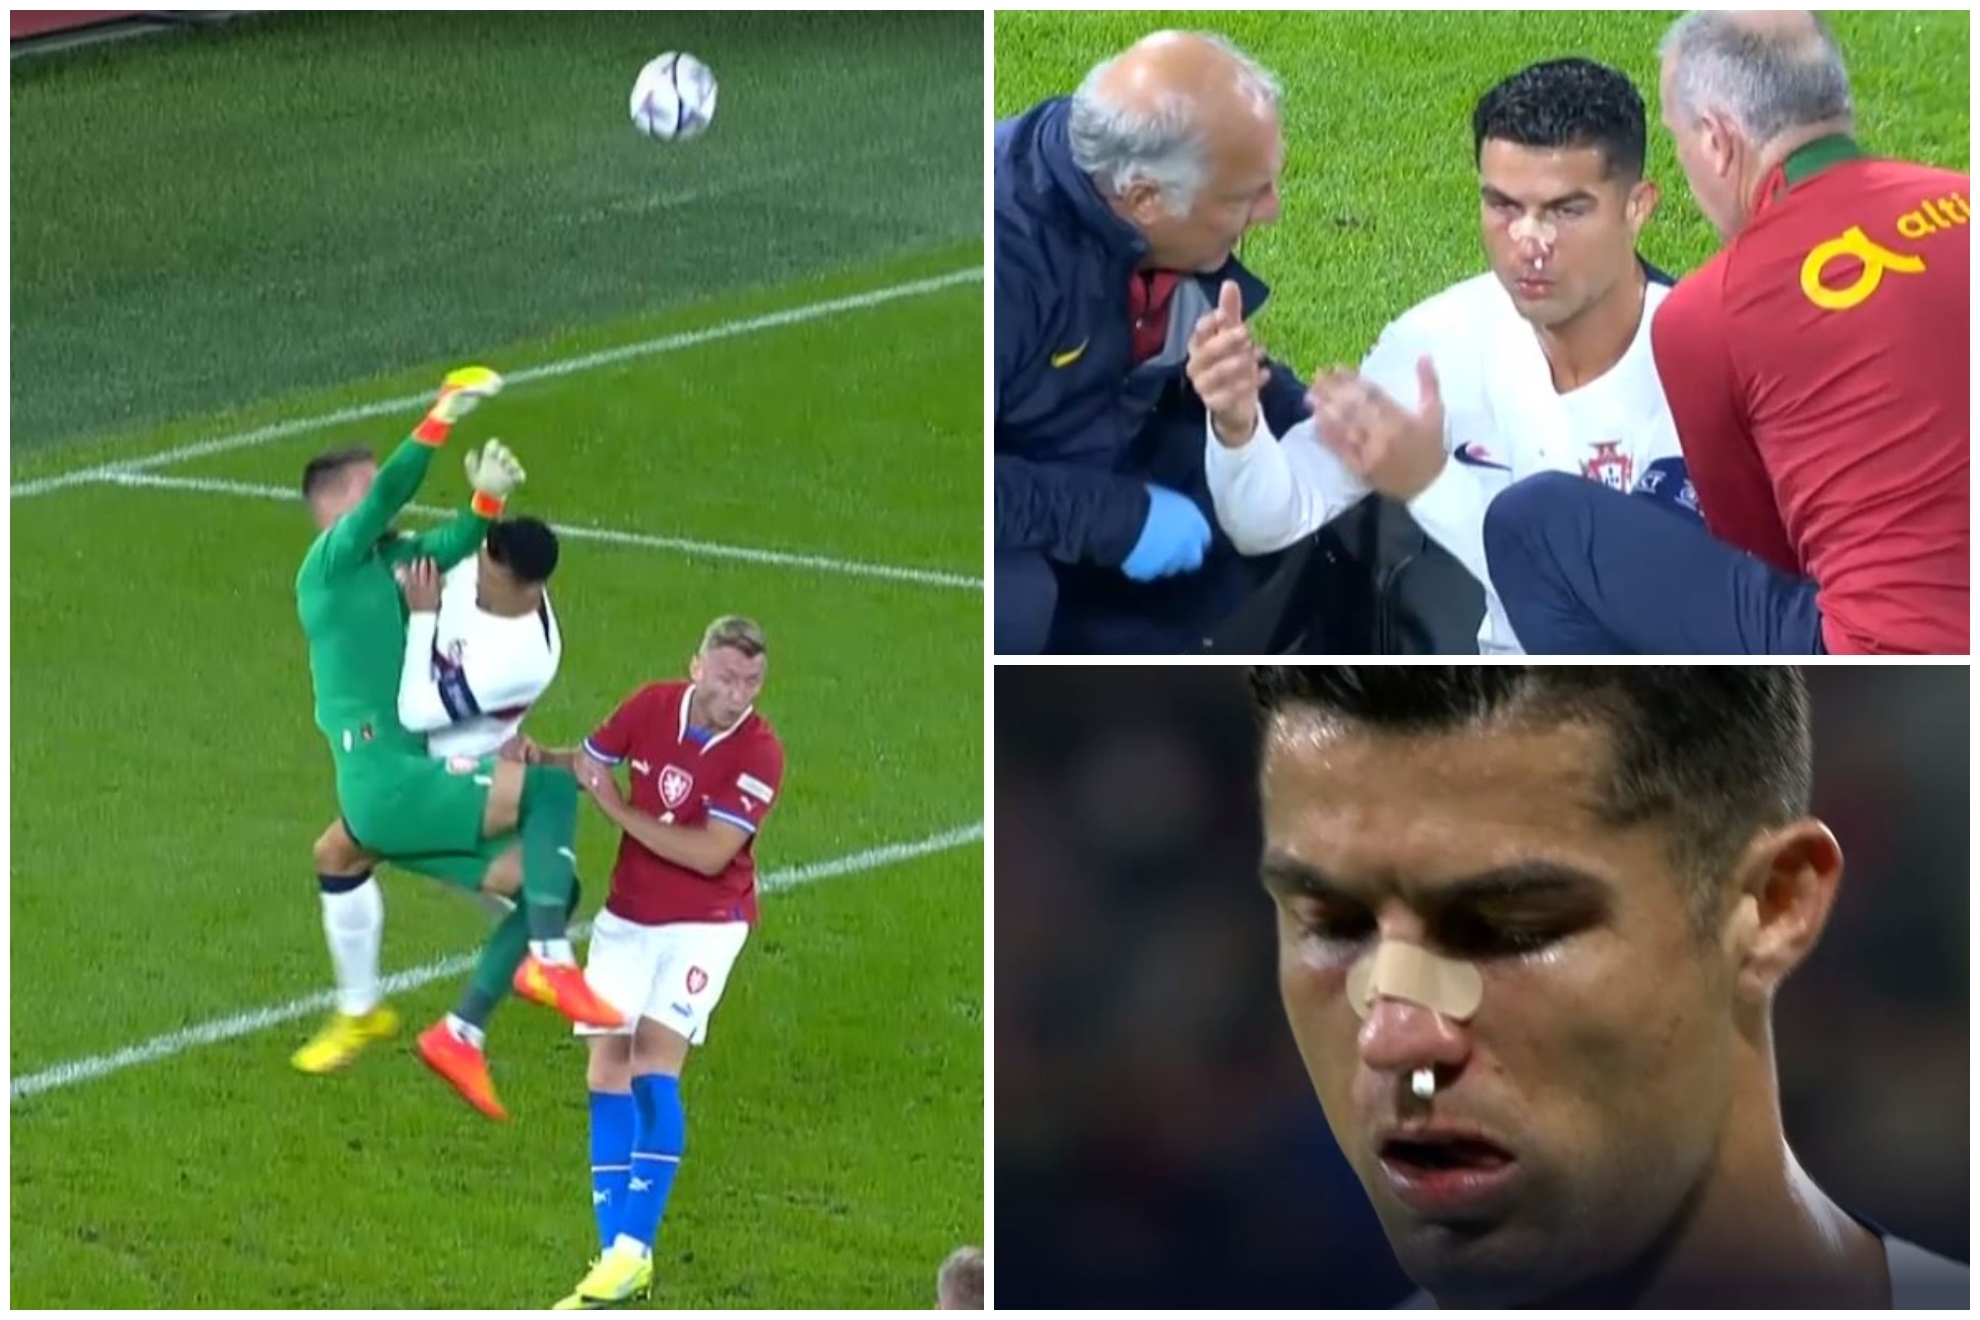 The blow that gave Cristiano Ronaldo a bloody nose